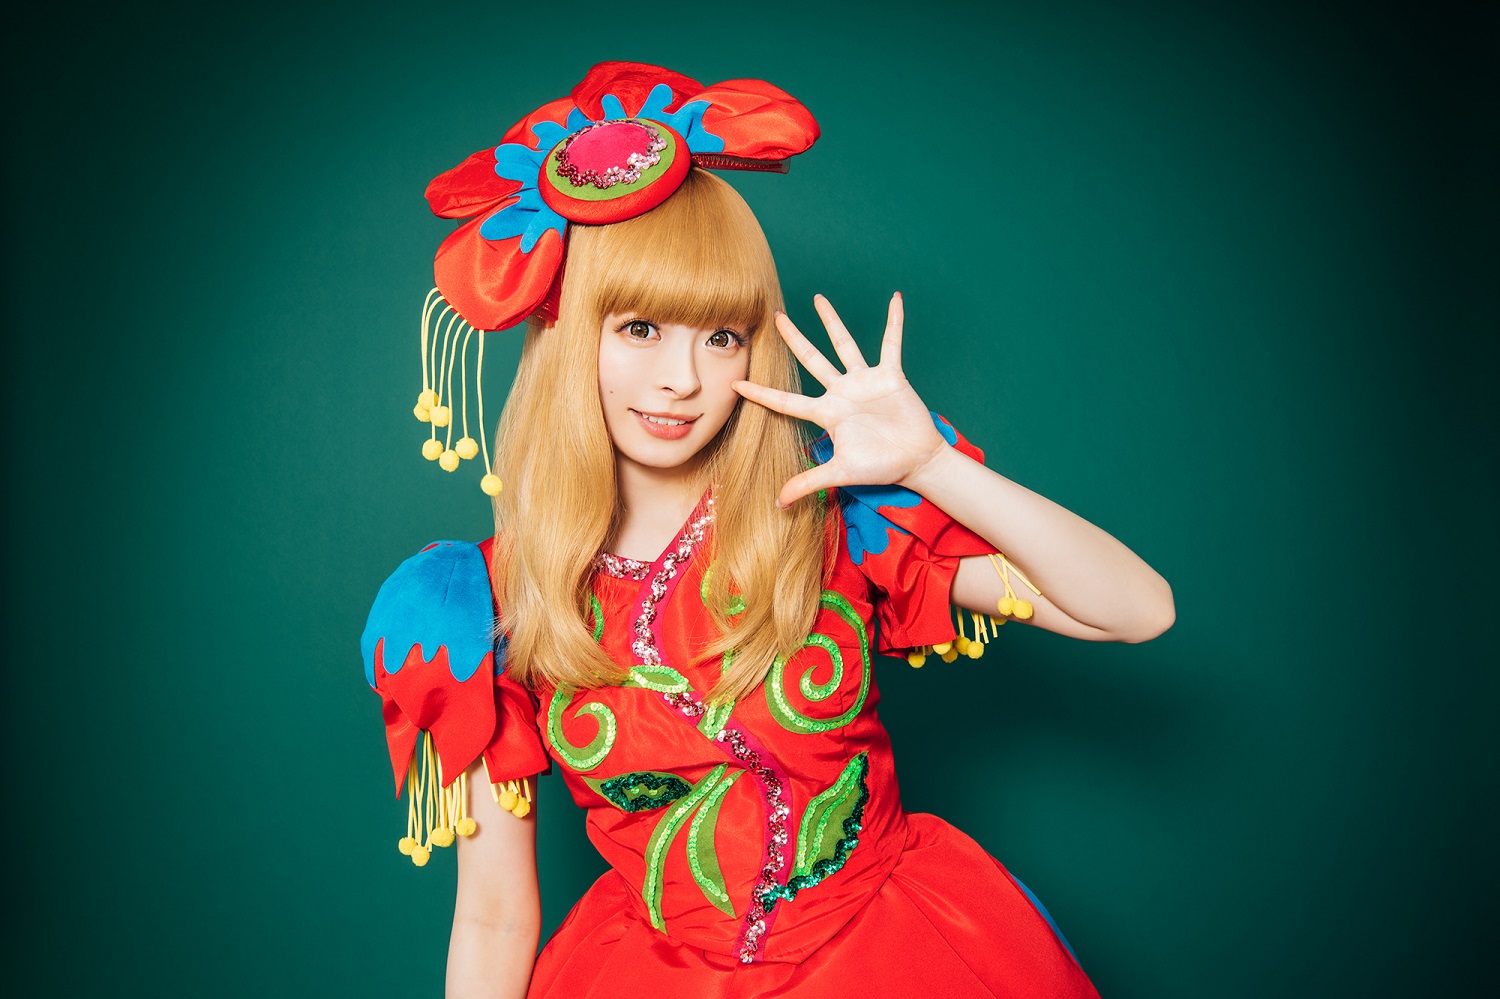 Kyary Pamyu Pamyu Releases Promo Video for 5iVE YEARS MONSTER WORLD TOUR 2016!